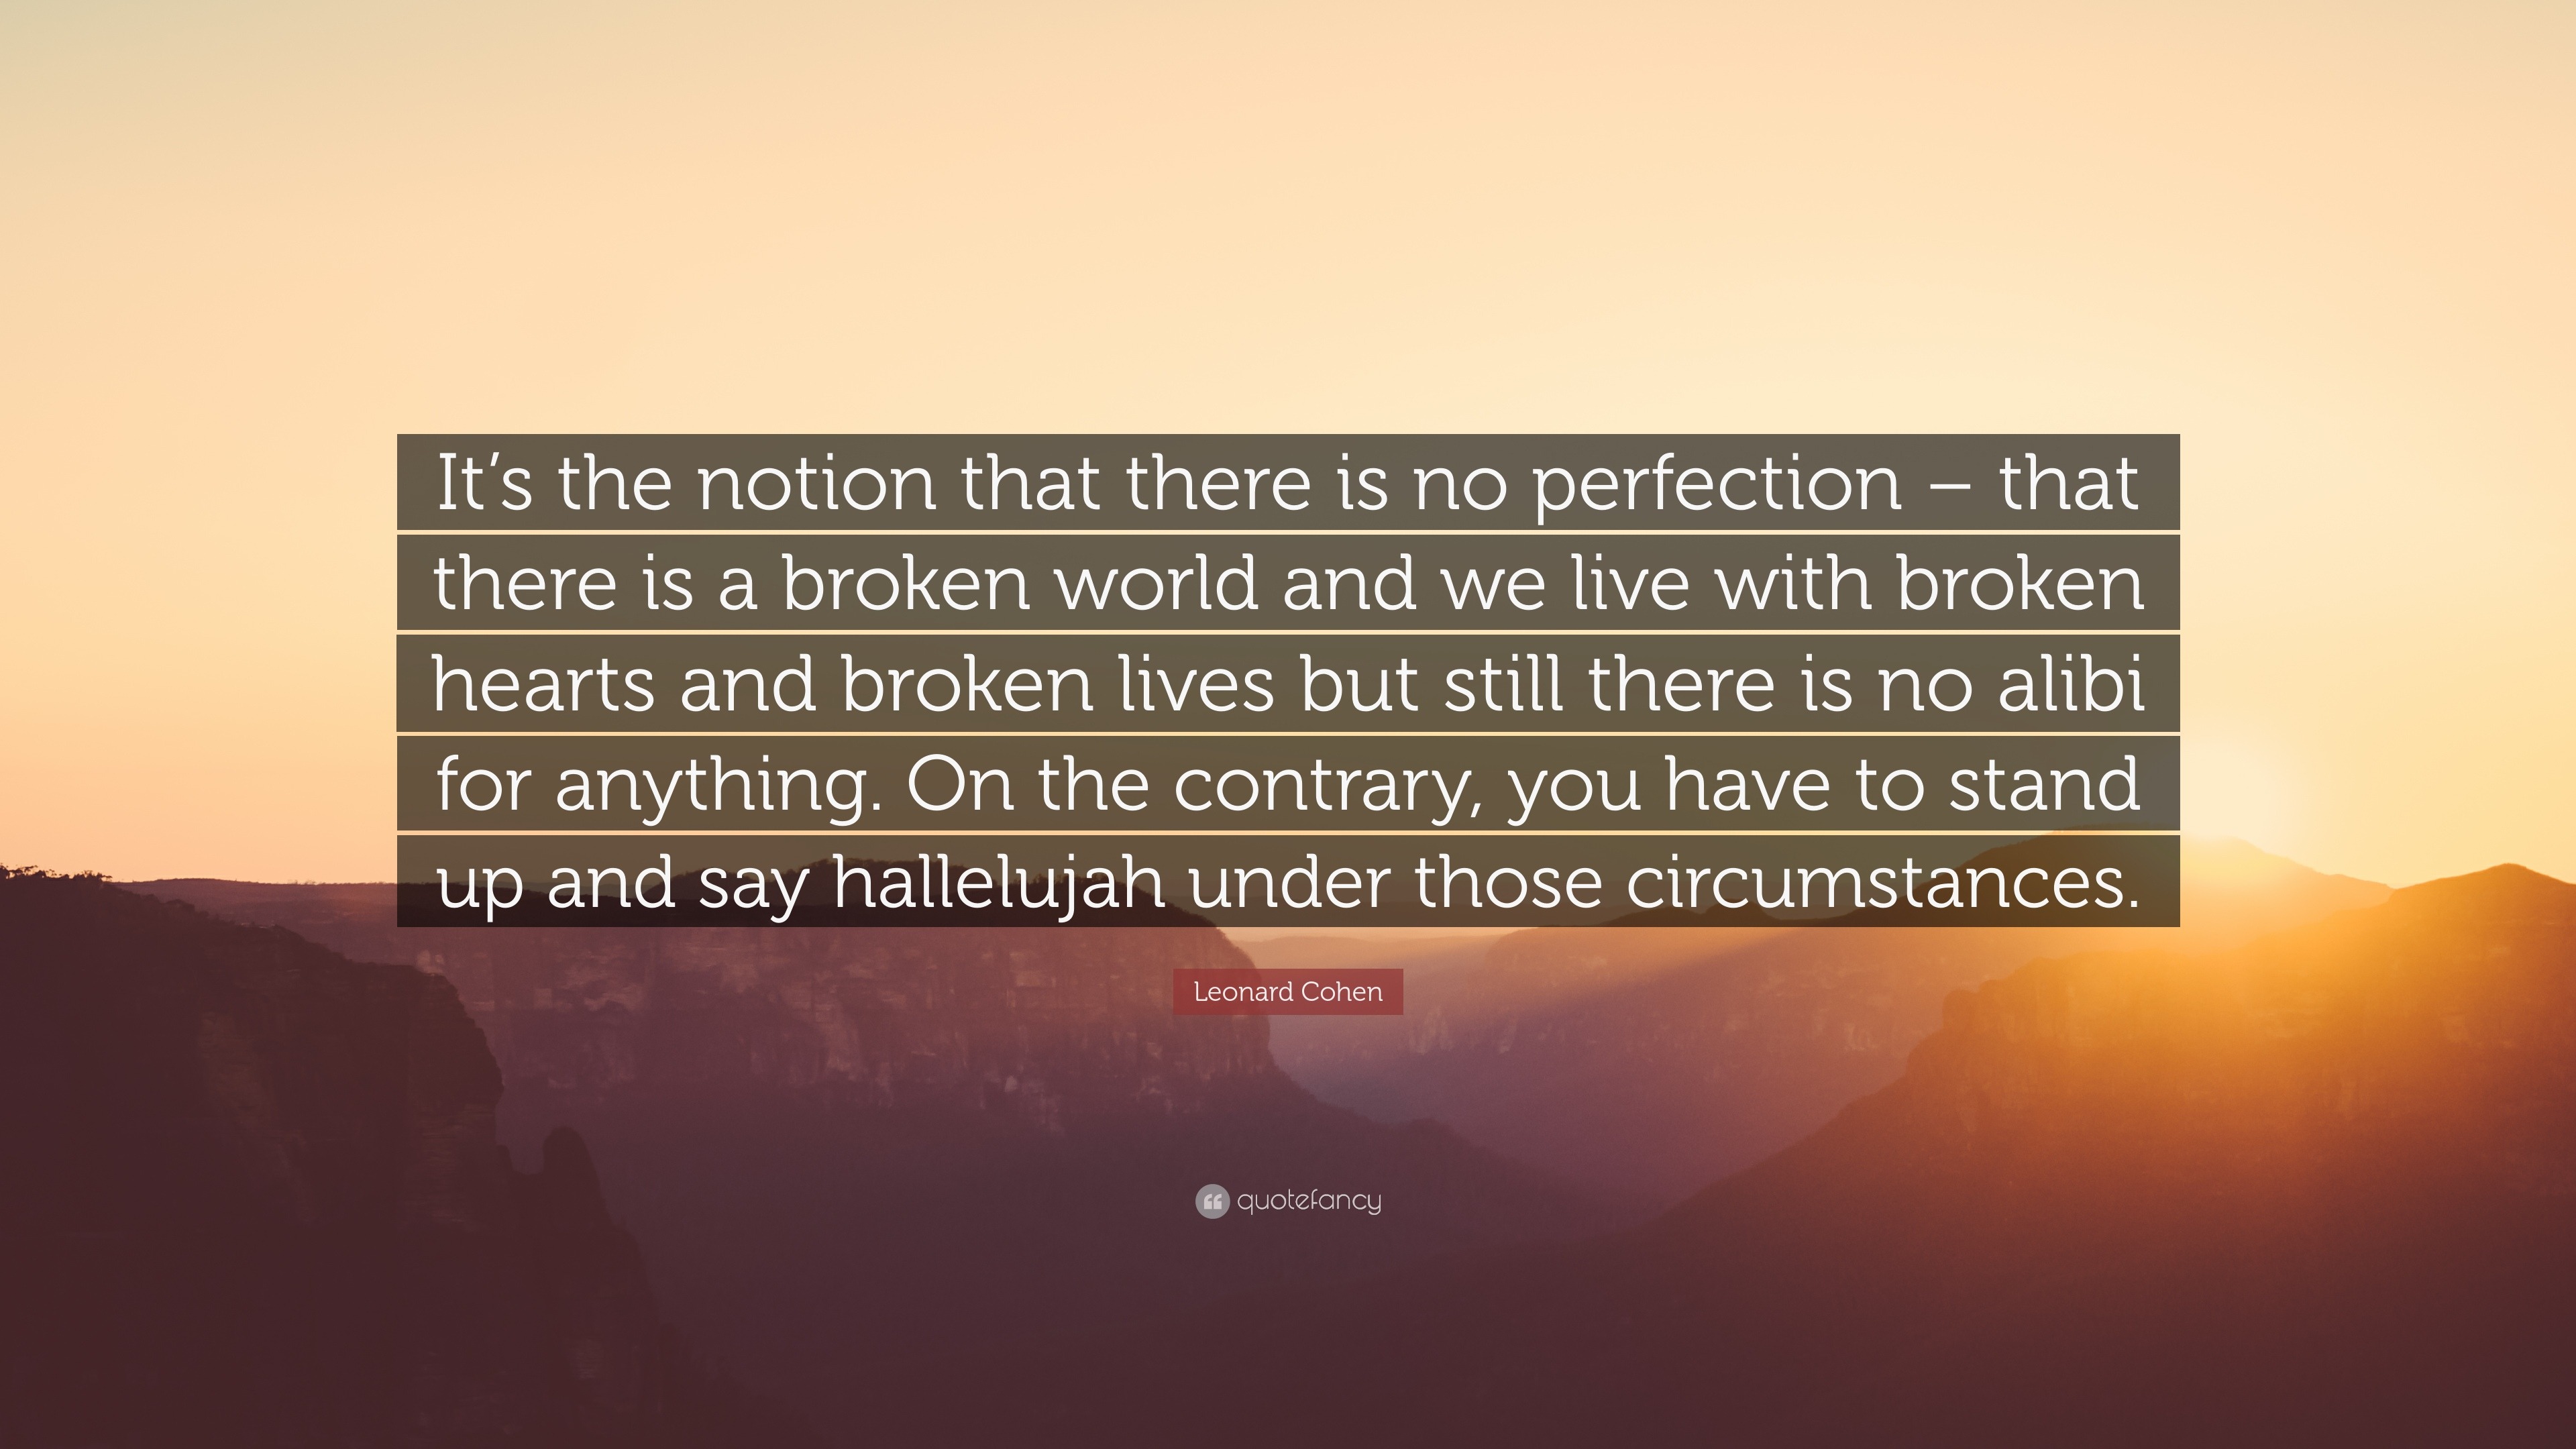 Leonard Cohen Quote: "It's the notion that there is no perfection ...